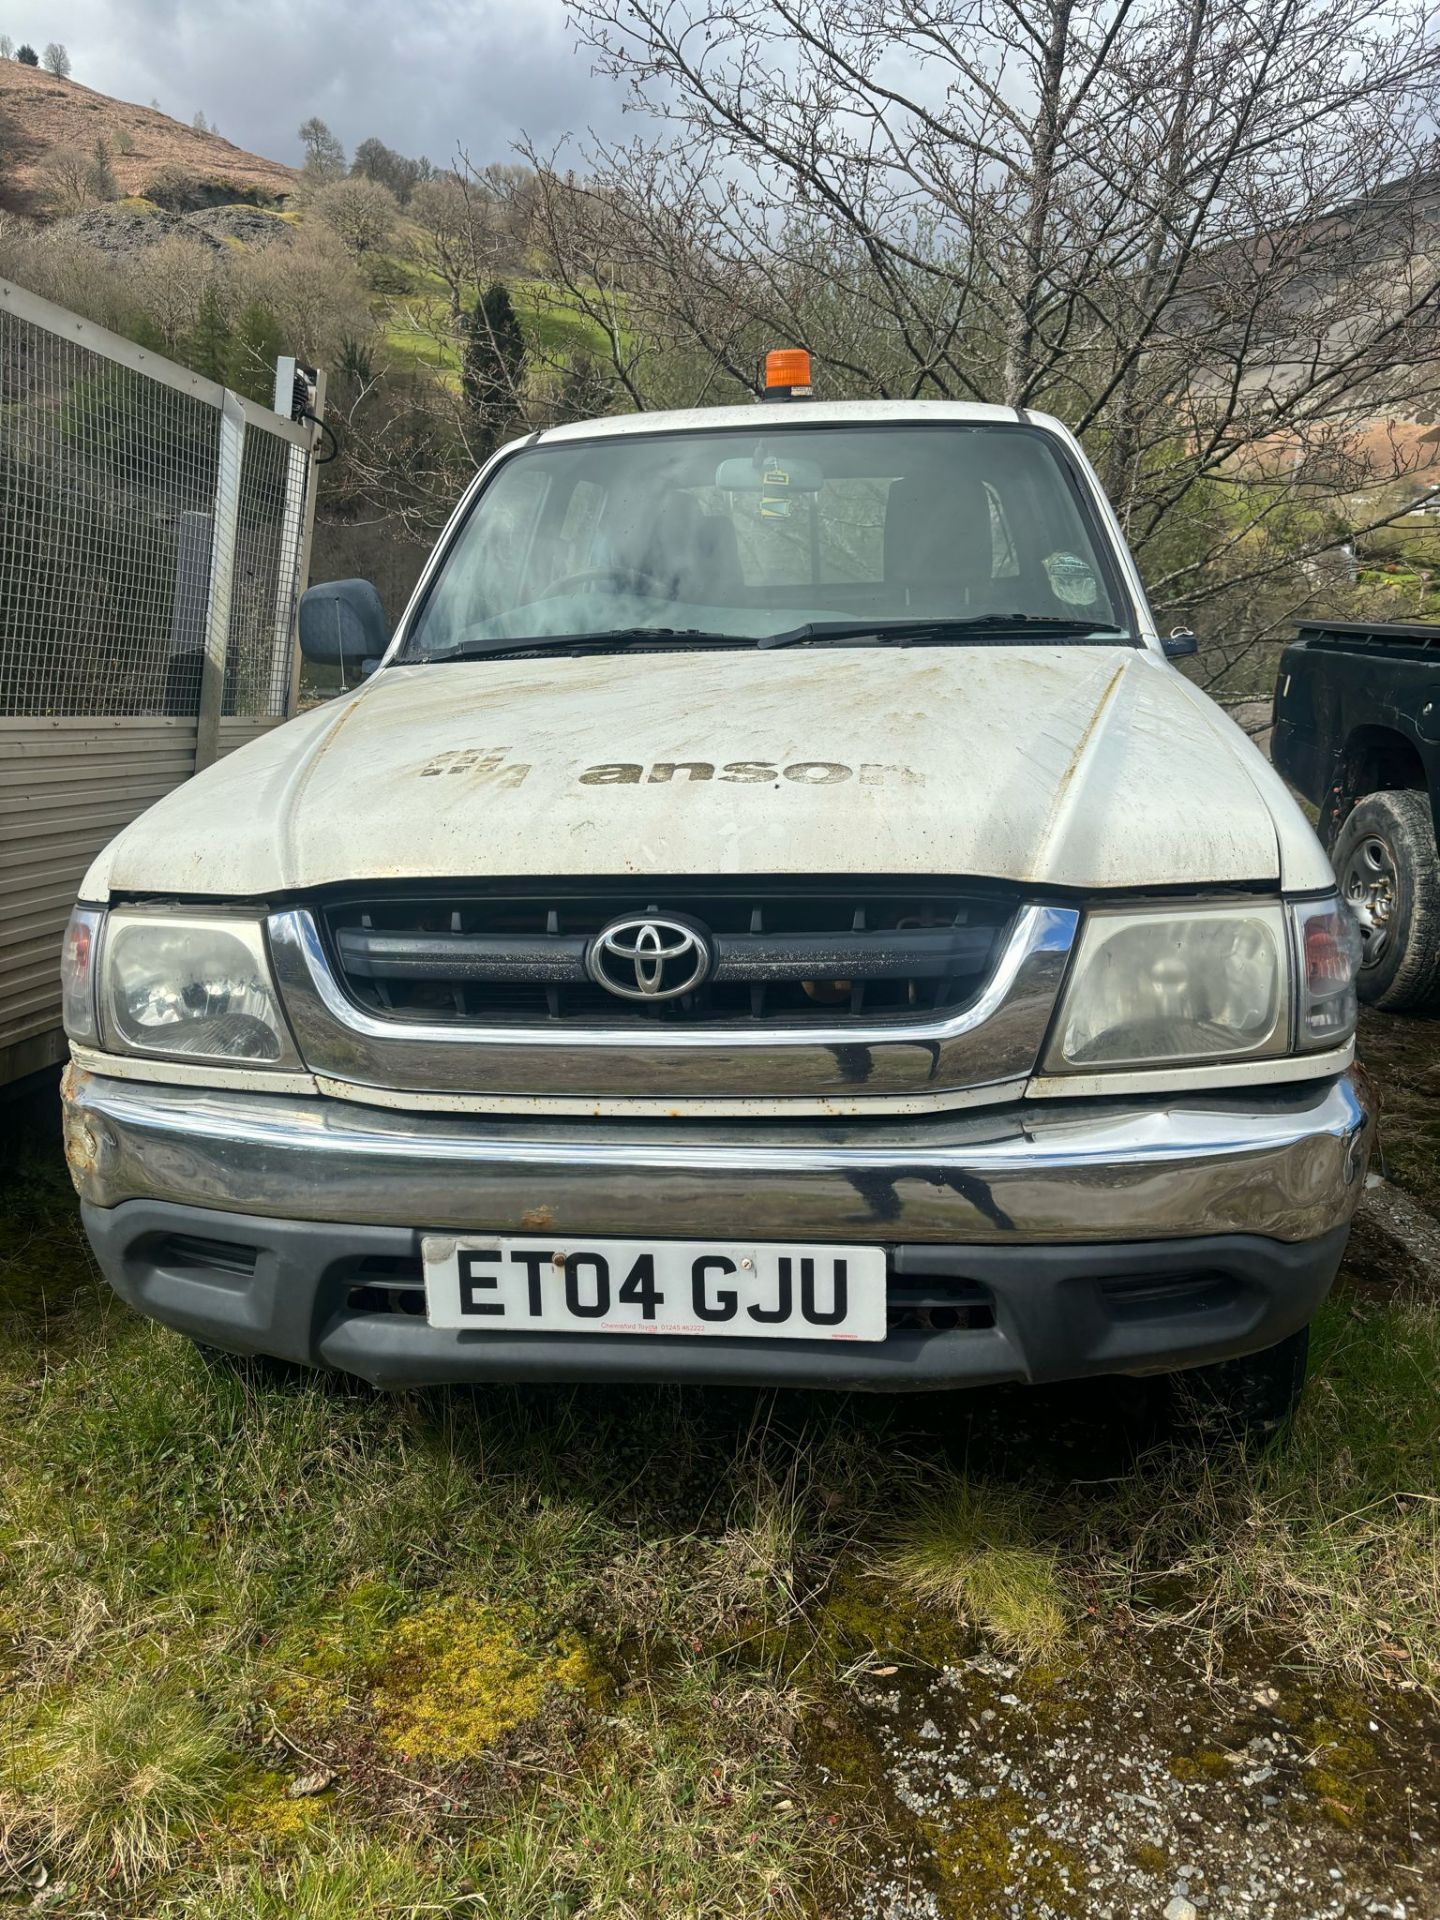 >>>SPECIAL CLEARANCE<<< 2004 TOYOTA HILUX DOUBLE CAB PICKUP TRUCK 4X4